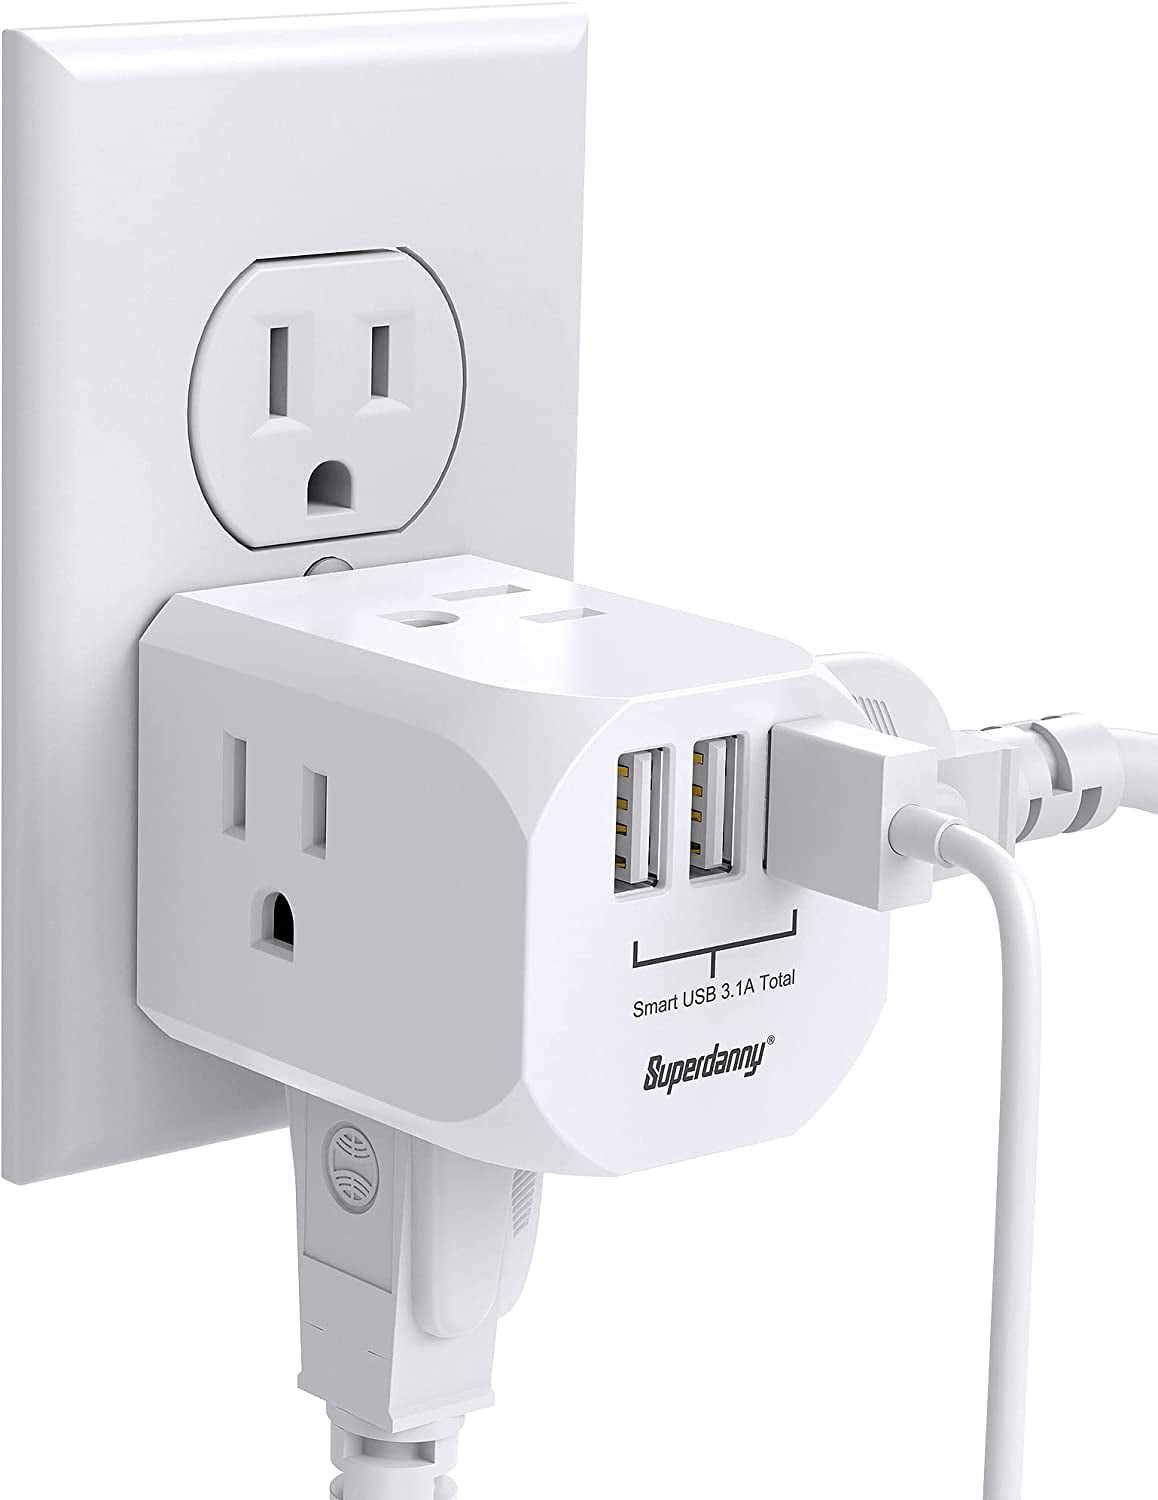 Multi Plug Extender with 4 Outlet Box Splitter Wall Outlet Power-2 Pack 